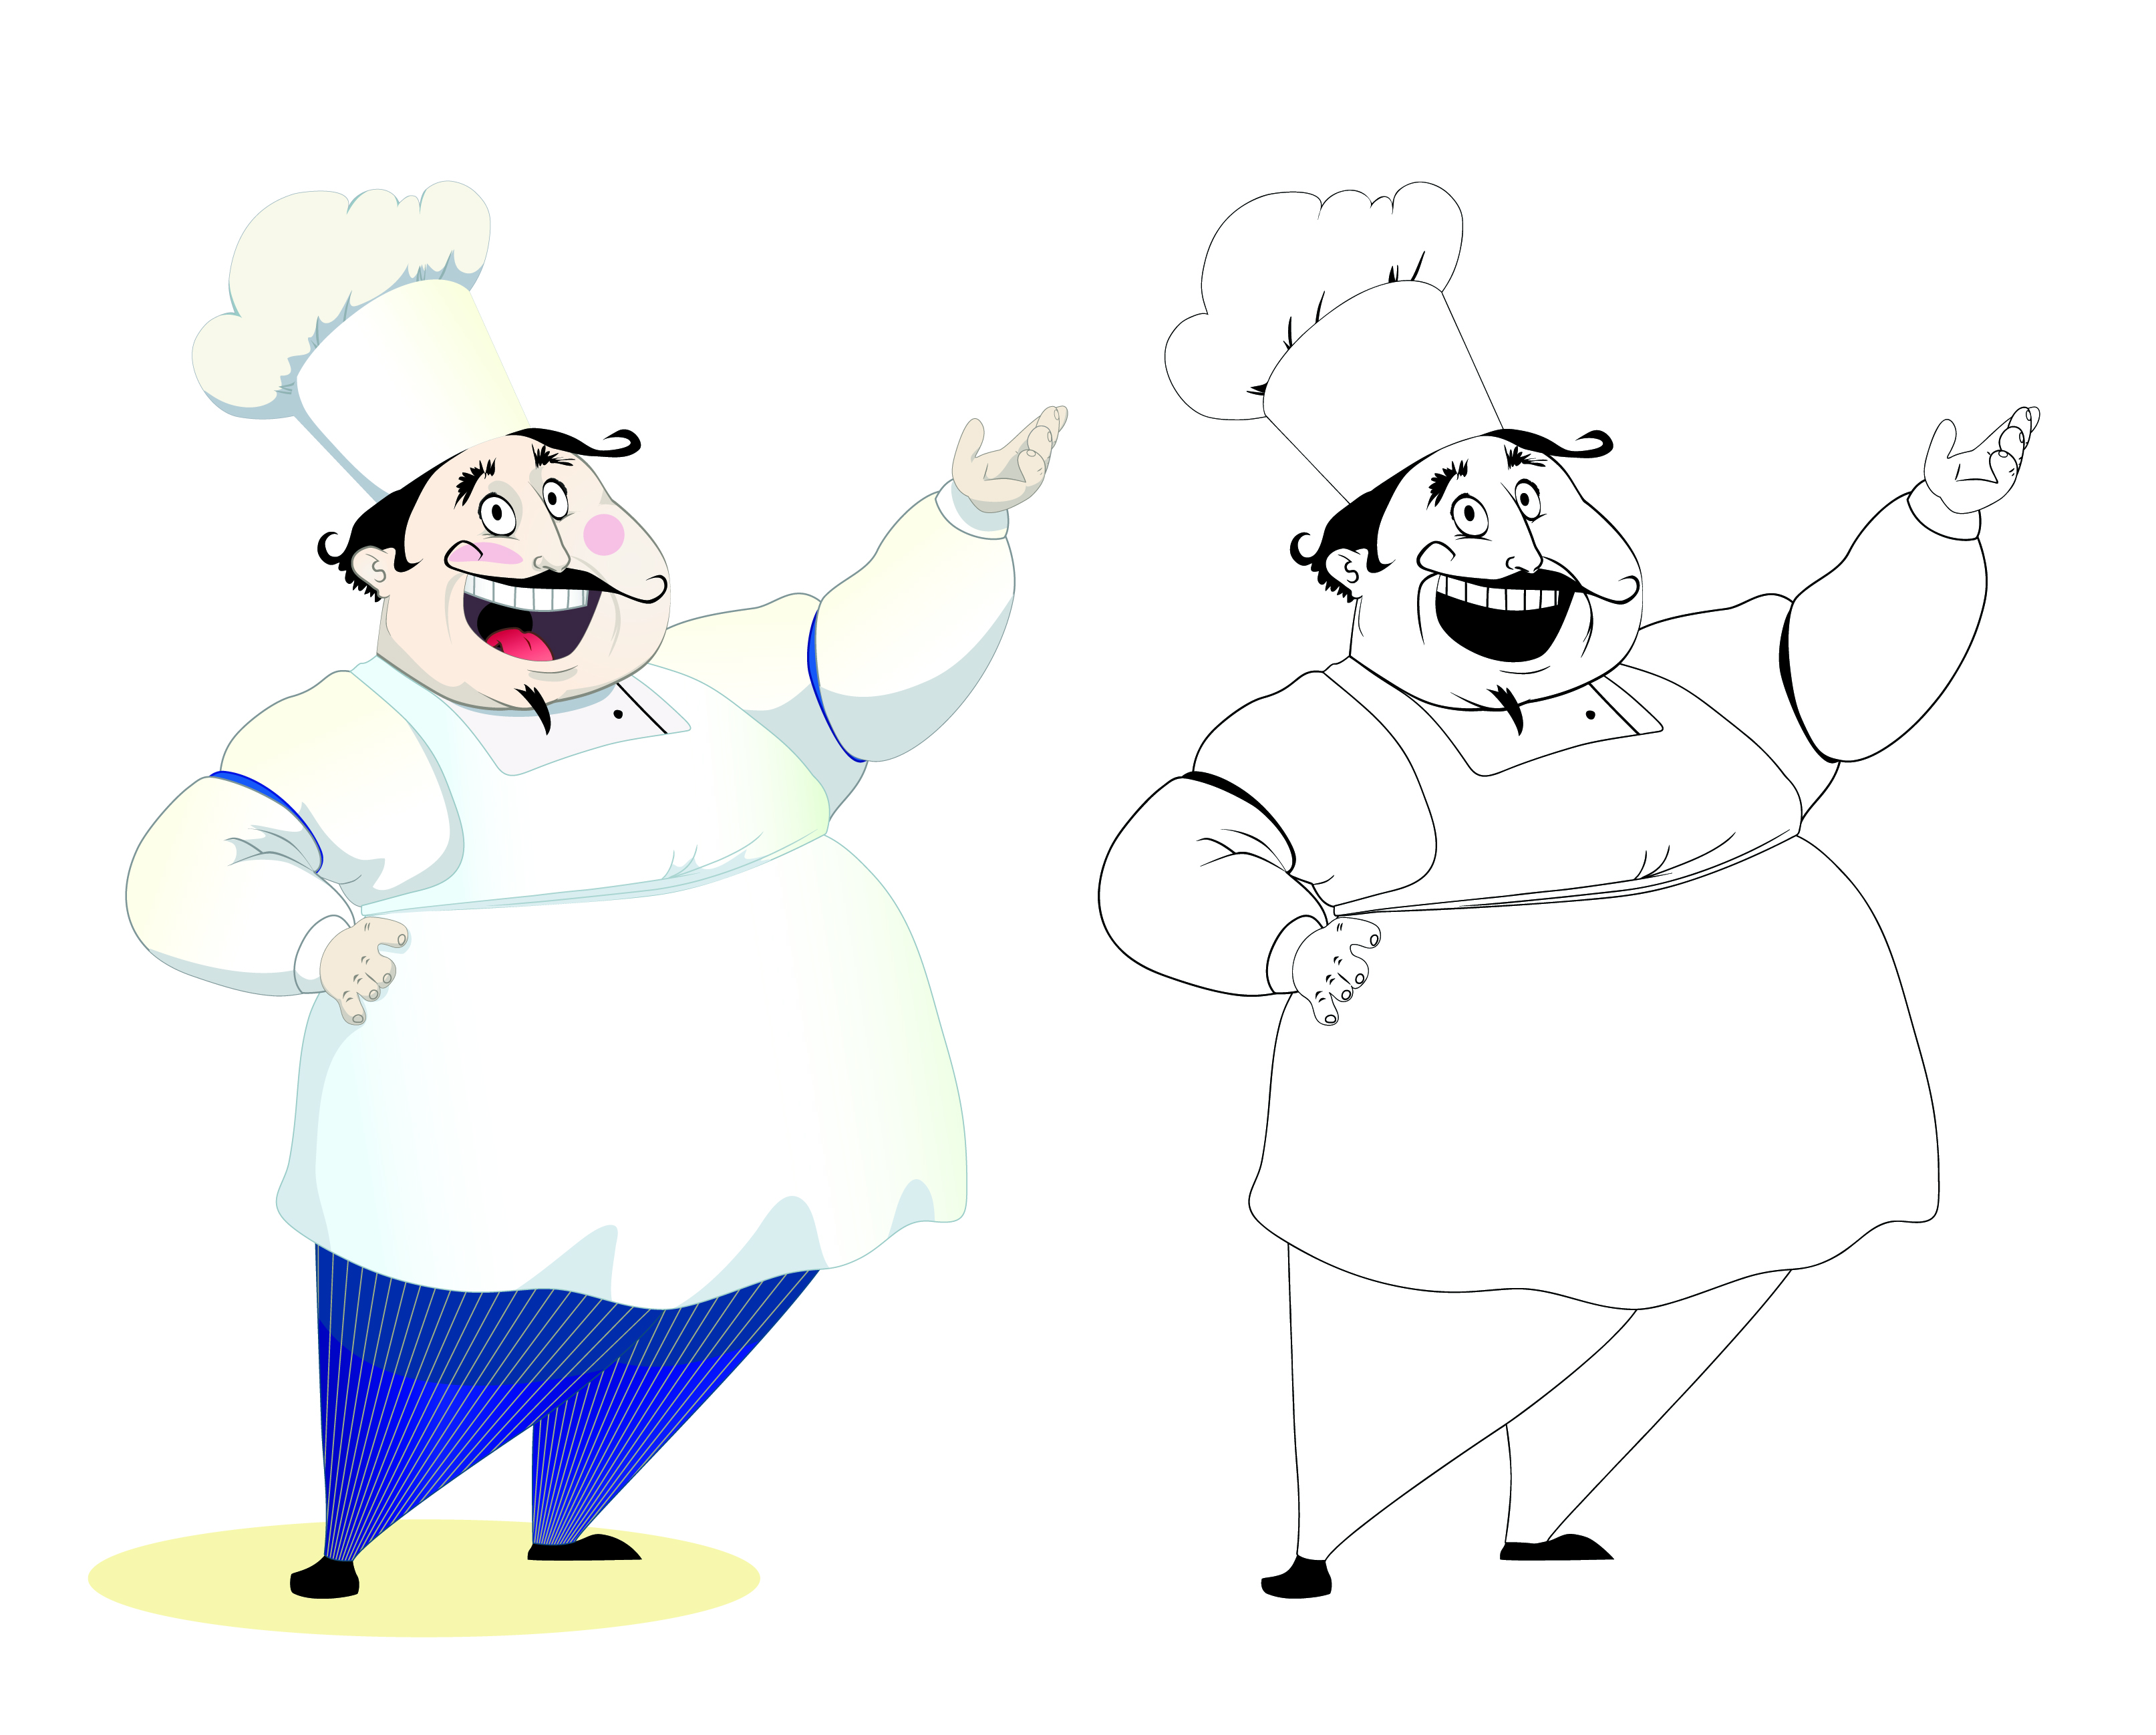 Cartoon characters chef 08 vector is free Vector cartoon vector that you can download for free. it has been downloaded 105 times since February 25, 2013.